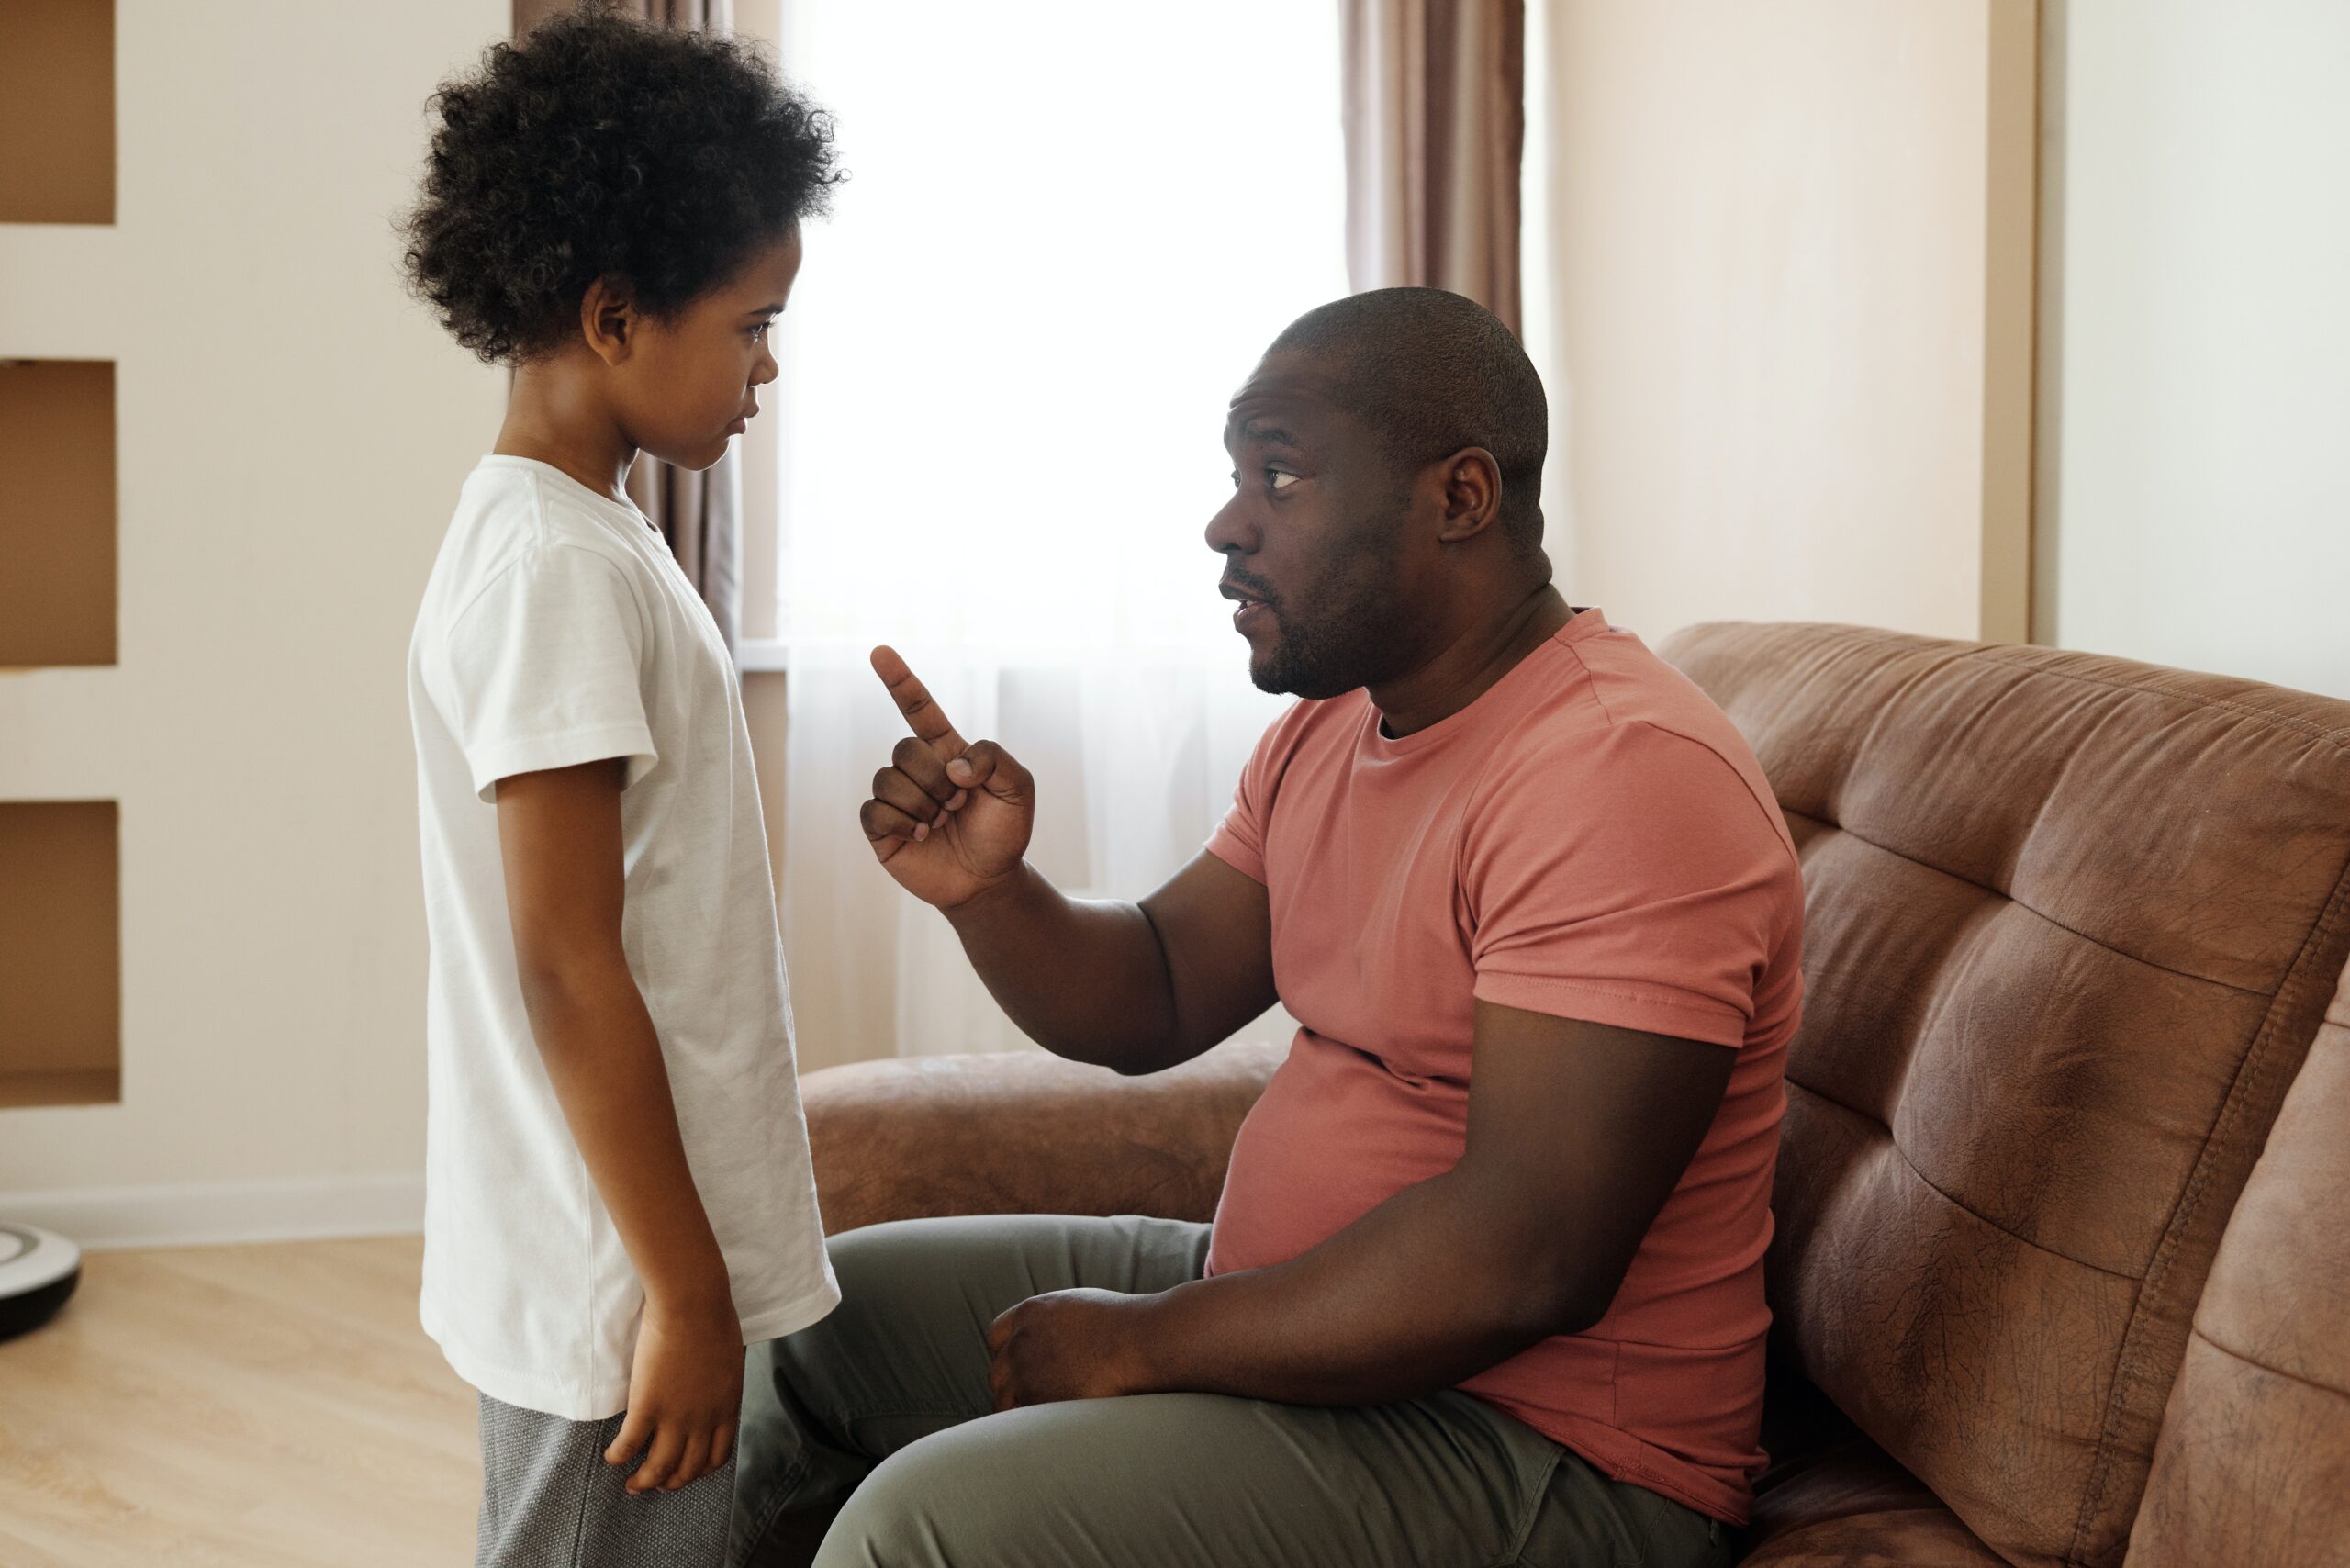 Father is lecturing his son, which causes son to feel reactive and defensive.